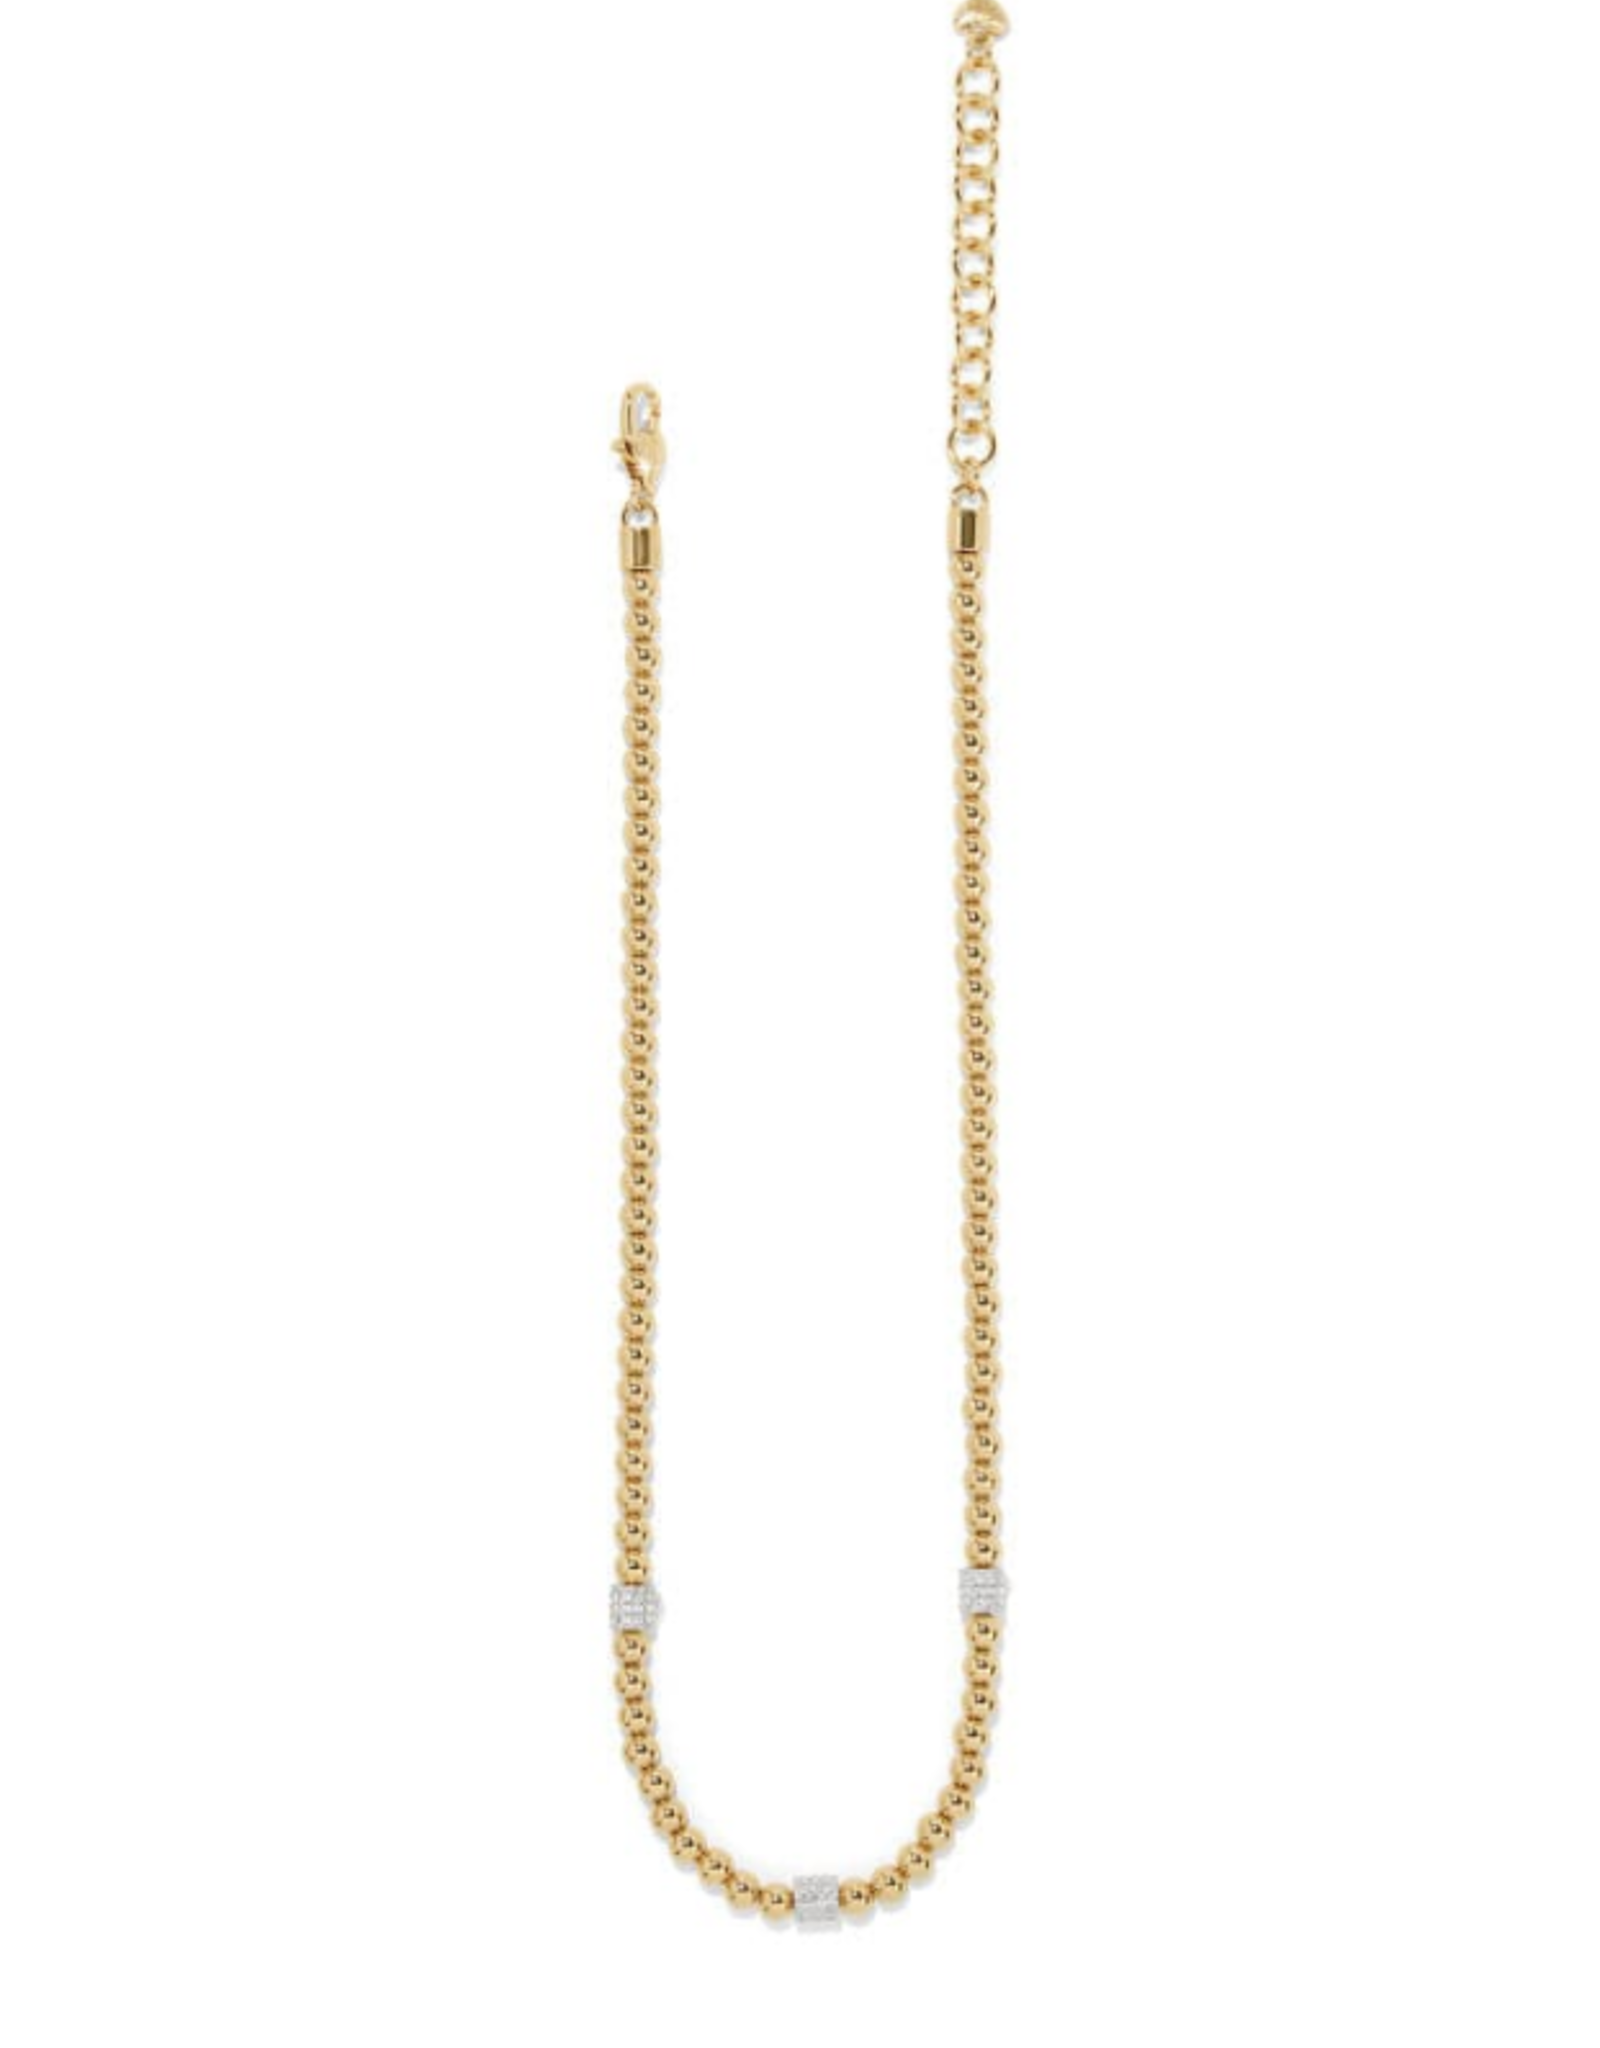 Brighton Gold Meridian Petite Beads Station Necklace